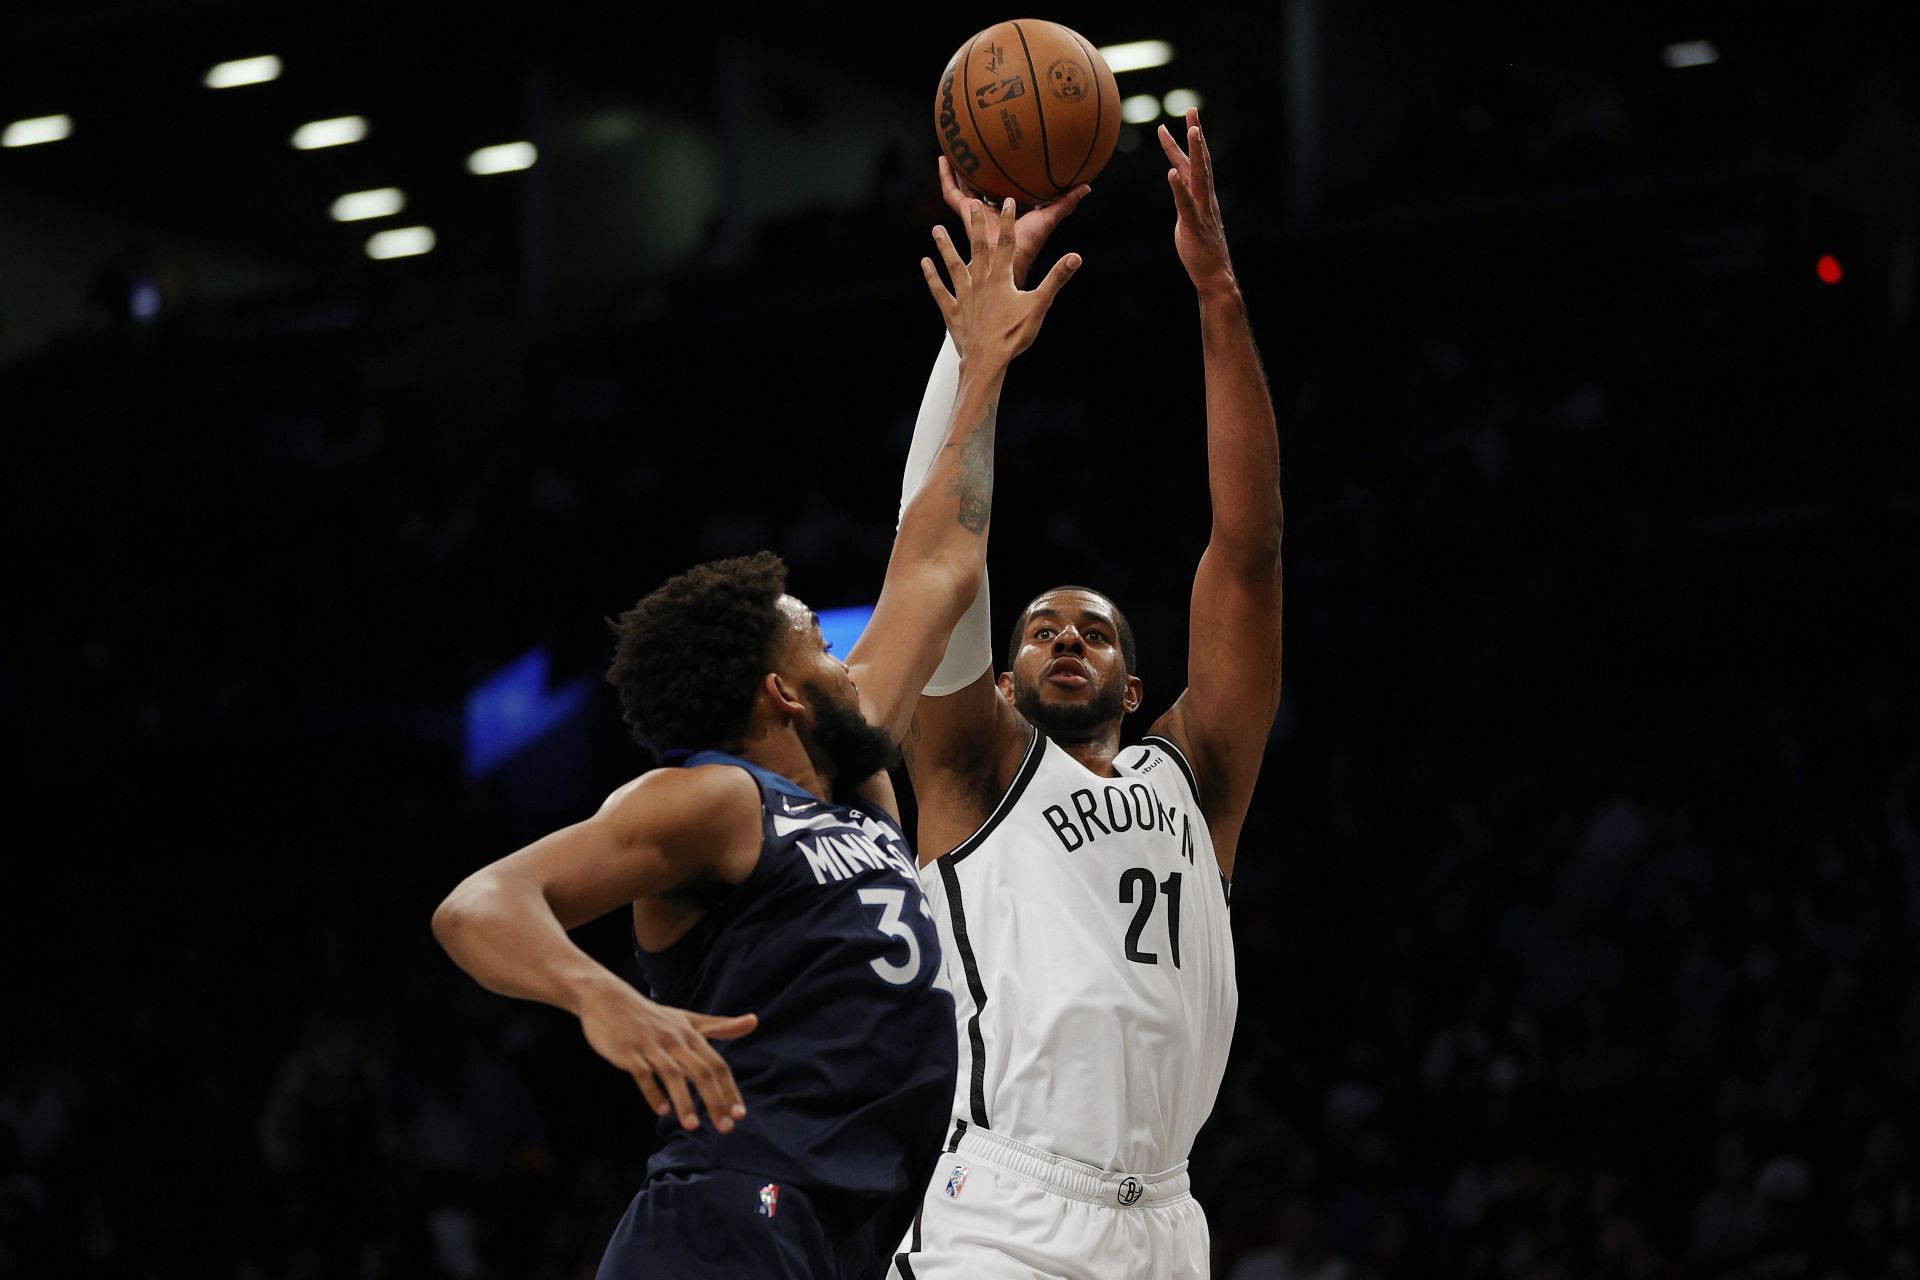 The Minnesota Timberwolves and the Brooklyn Nets will face off at the Barclays Center on Friday